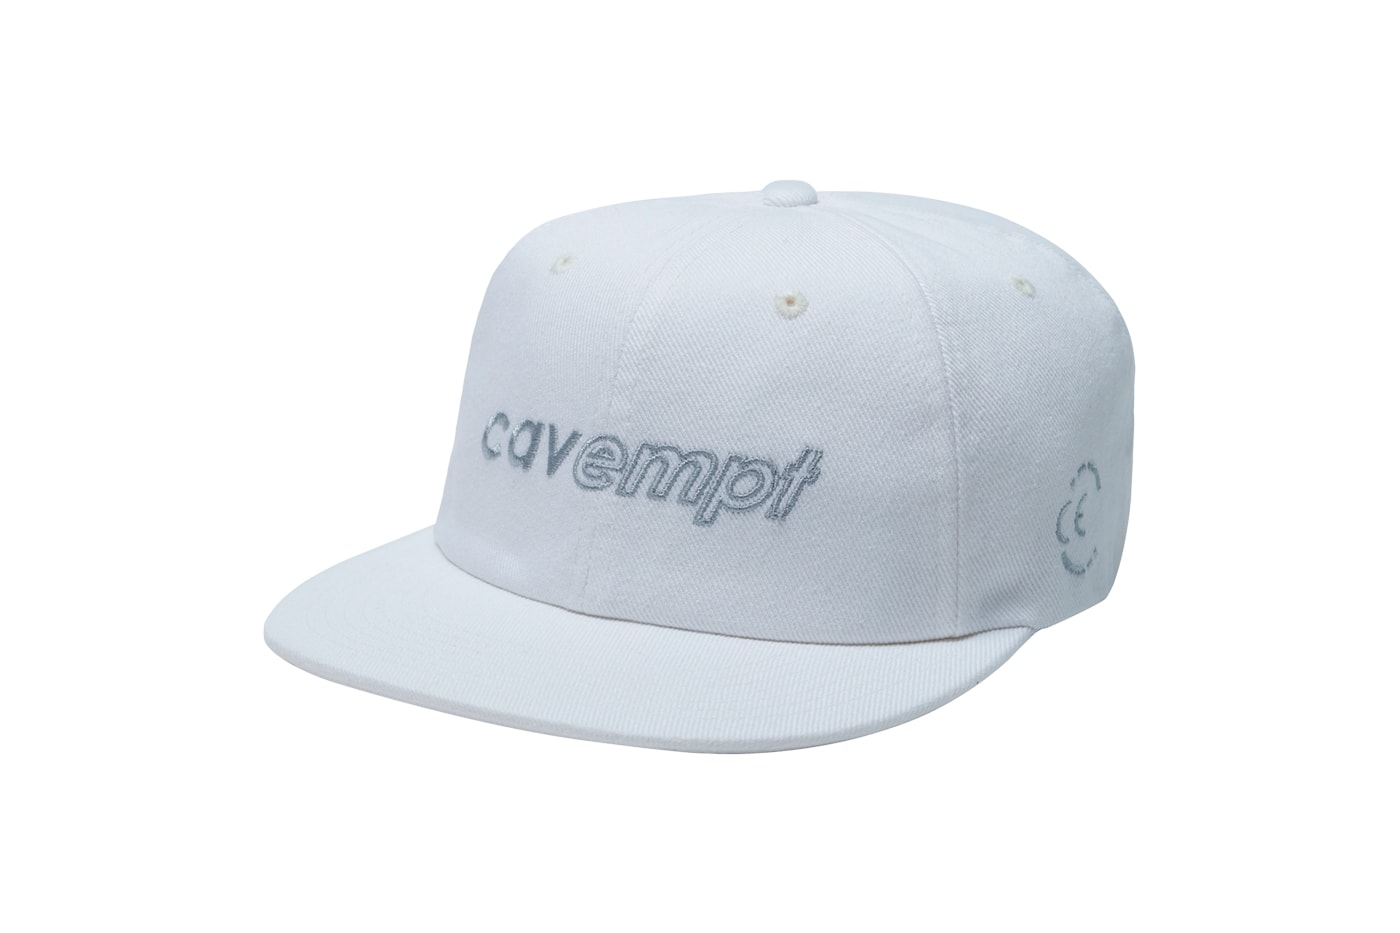 Cav Empt Drop 12 Spring/Summer 2020 Collection sk8thing toby feltwell japan streetwear LIVING ABSTRACTION T OVERDYE REFLECTION OF LIGHT T SOLID SEAM DENIM BEACH PANTS CAV EMPT WHITE LOW CAP